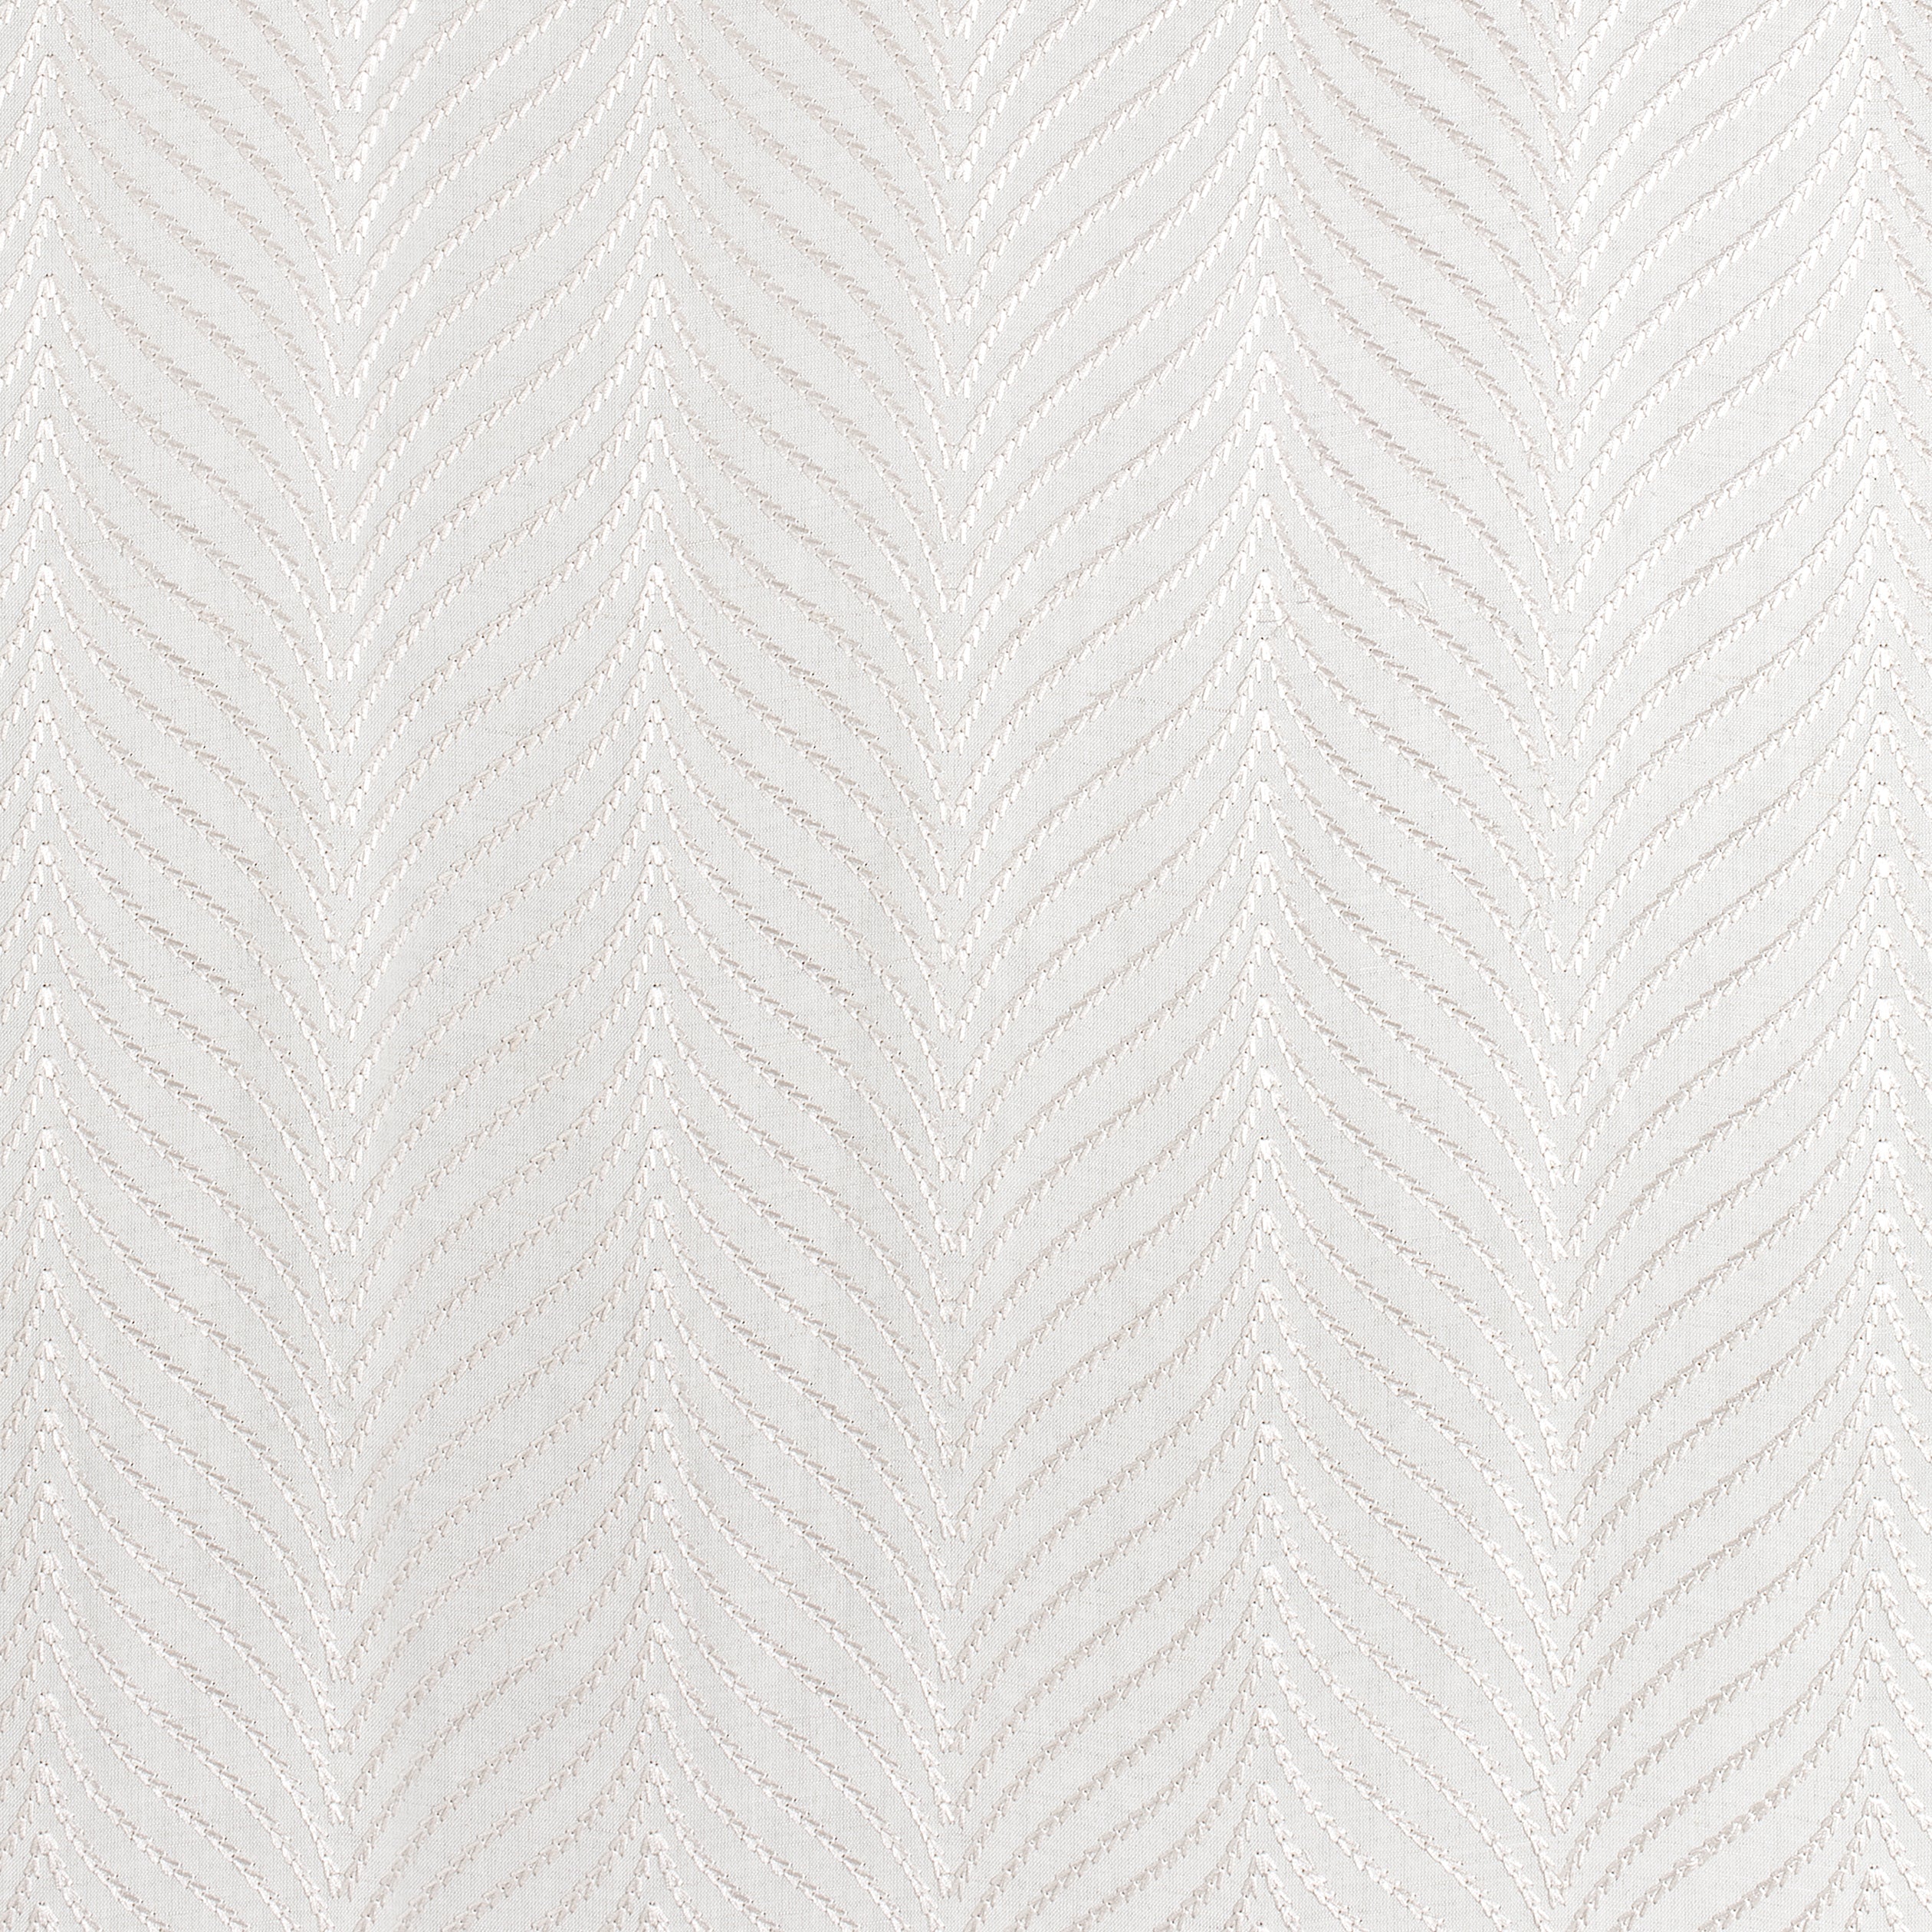 Clayton Herringbone Embroidery fabric in ivory color - pattern number W775444 - by Thibaut in the Dynasty collection